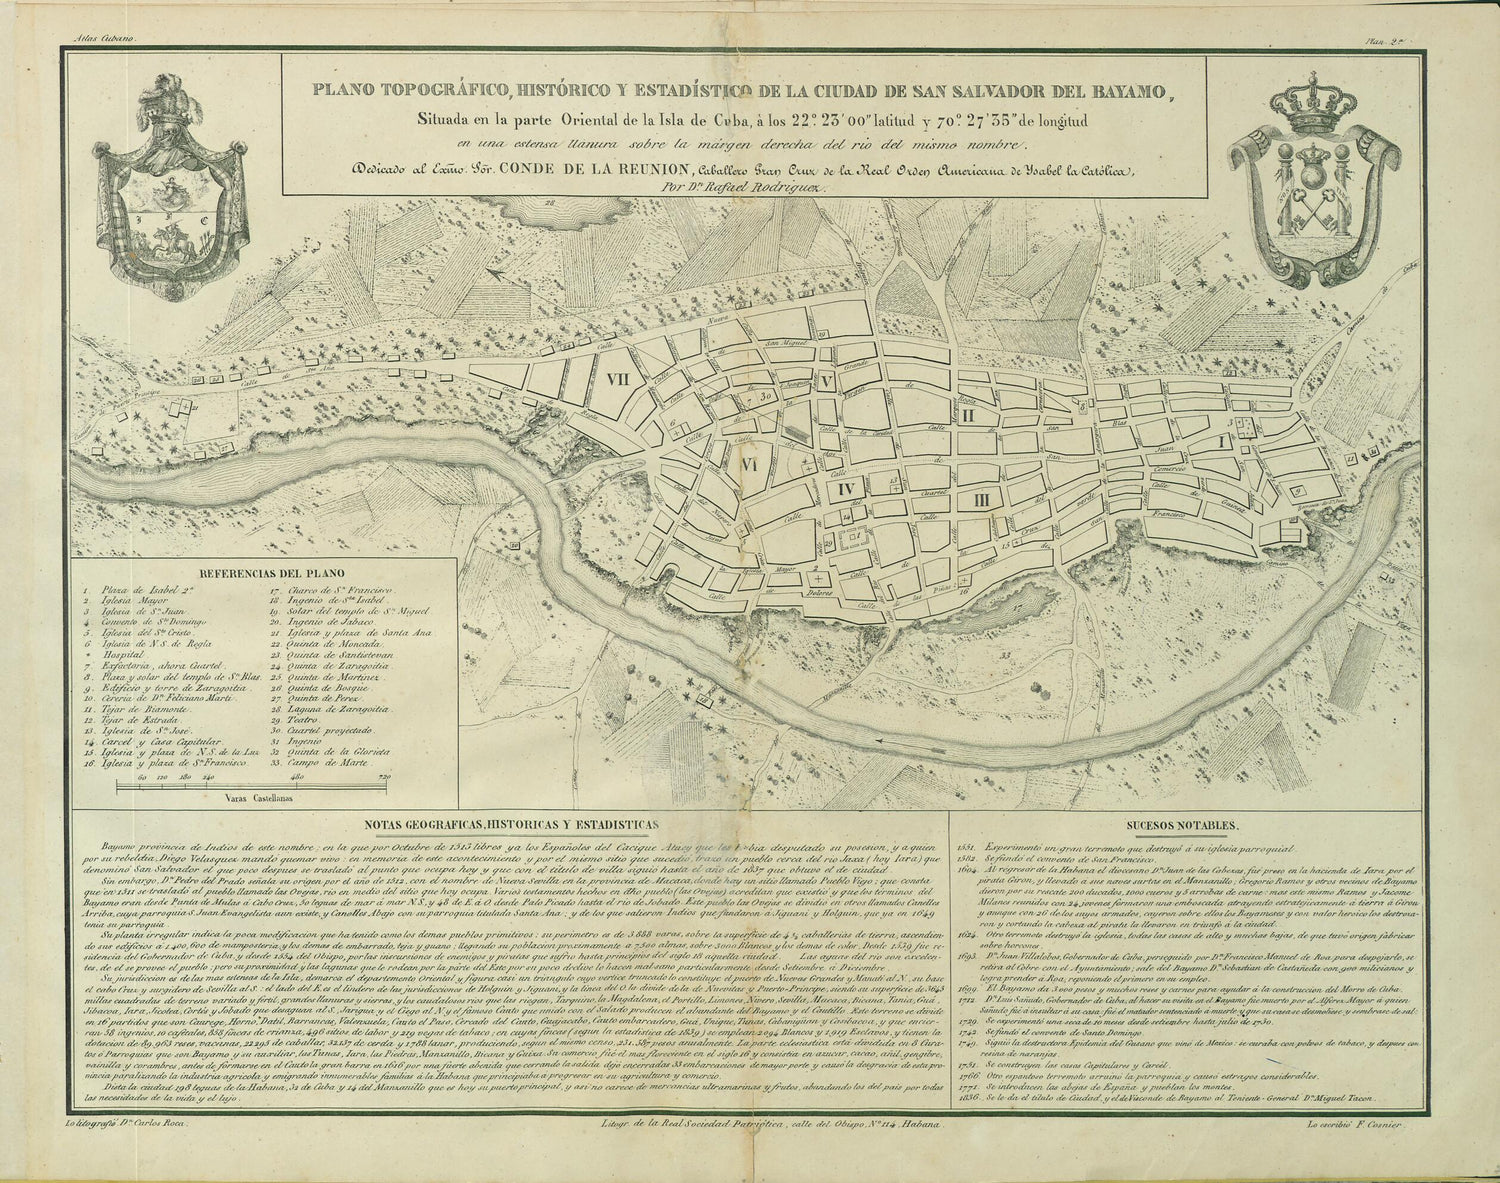 This old map of Topographical, Historical, and Statistical Map of the City of San Salvador De Bayamo. (Plano Topográfico, Histórico Y Estadístico De La Ciudad De San Salvador De Bayamo) from 1841 was created by F. Cosnier, Carlos Roca, Rafael Rodrígu